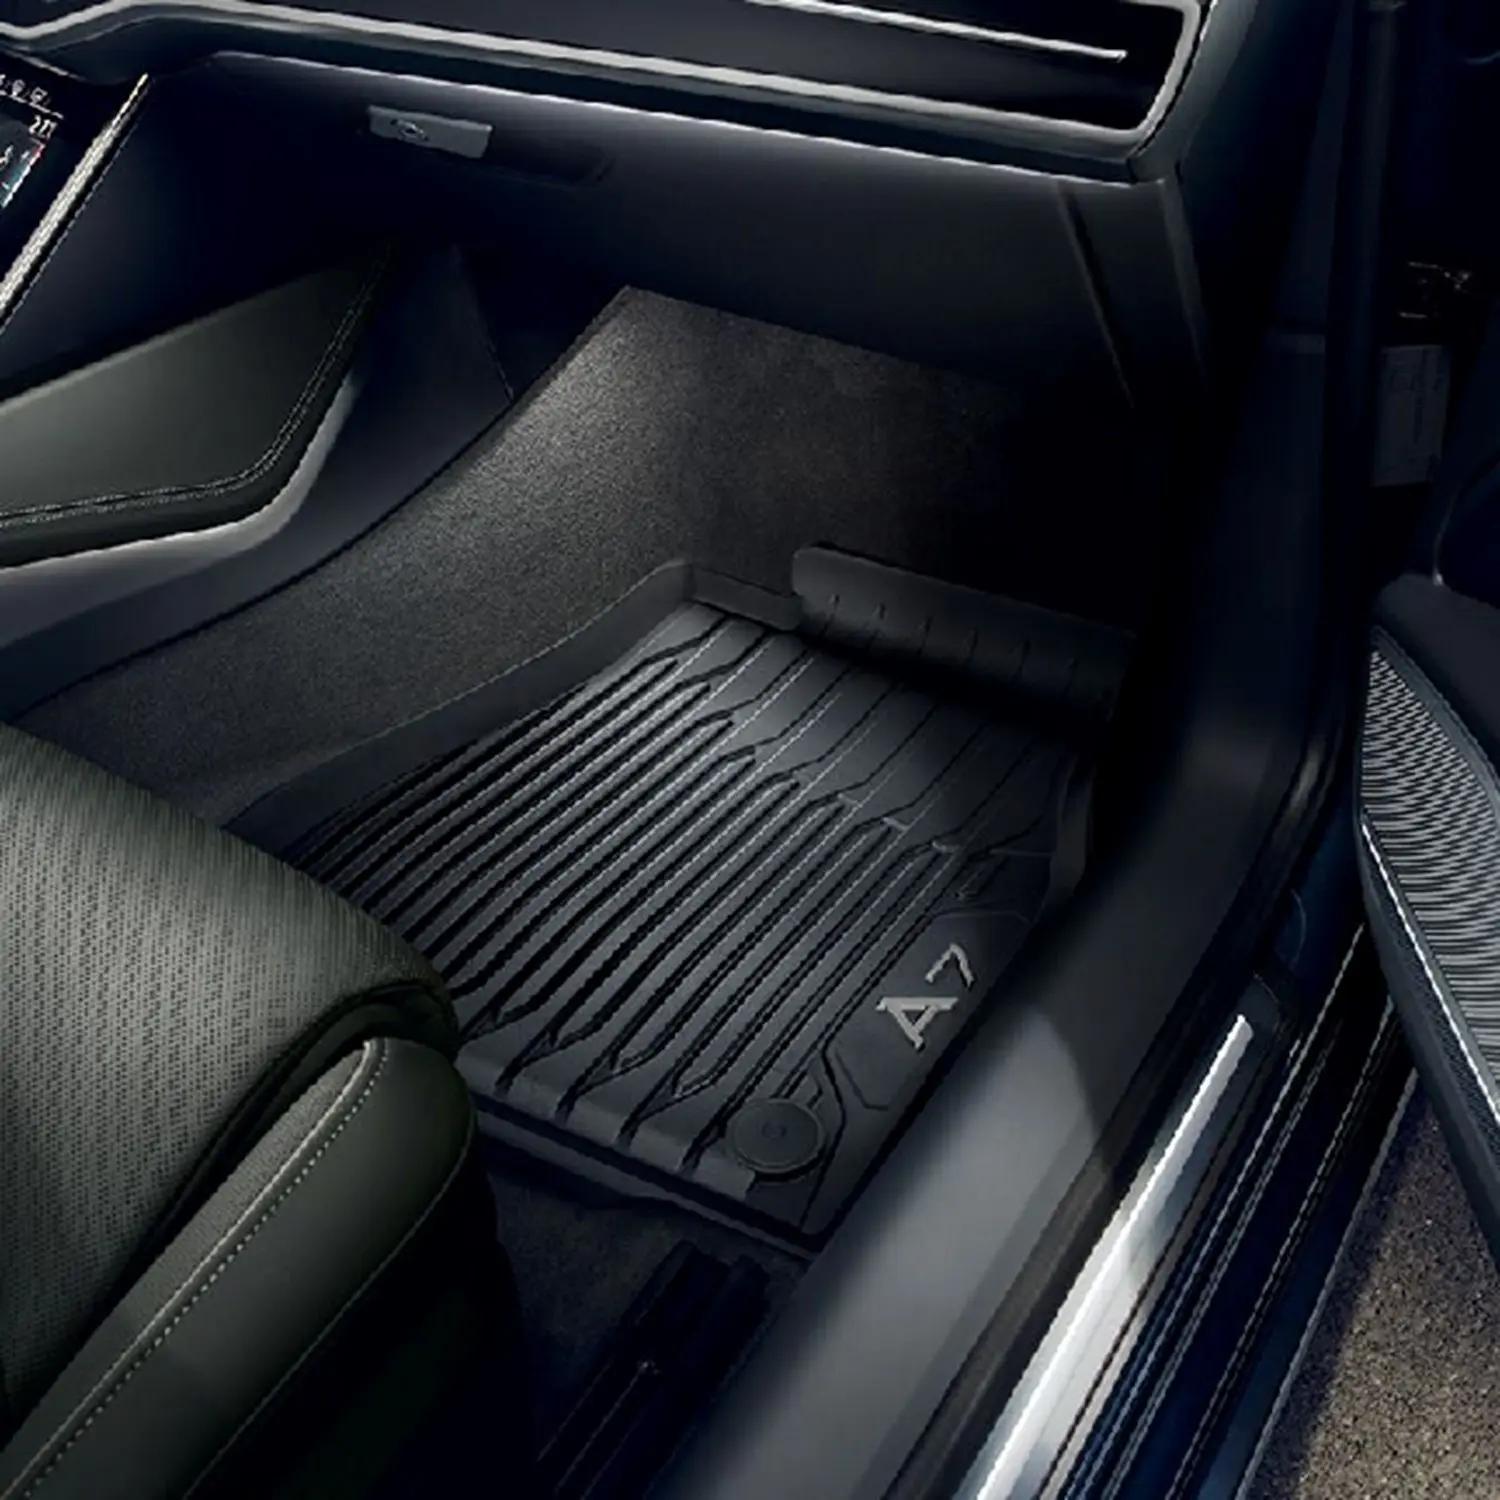 Audi Genuine Floor Mats (these specific Mats are for the Audi A7)